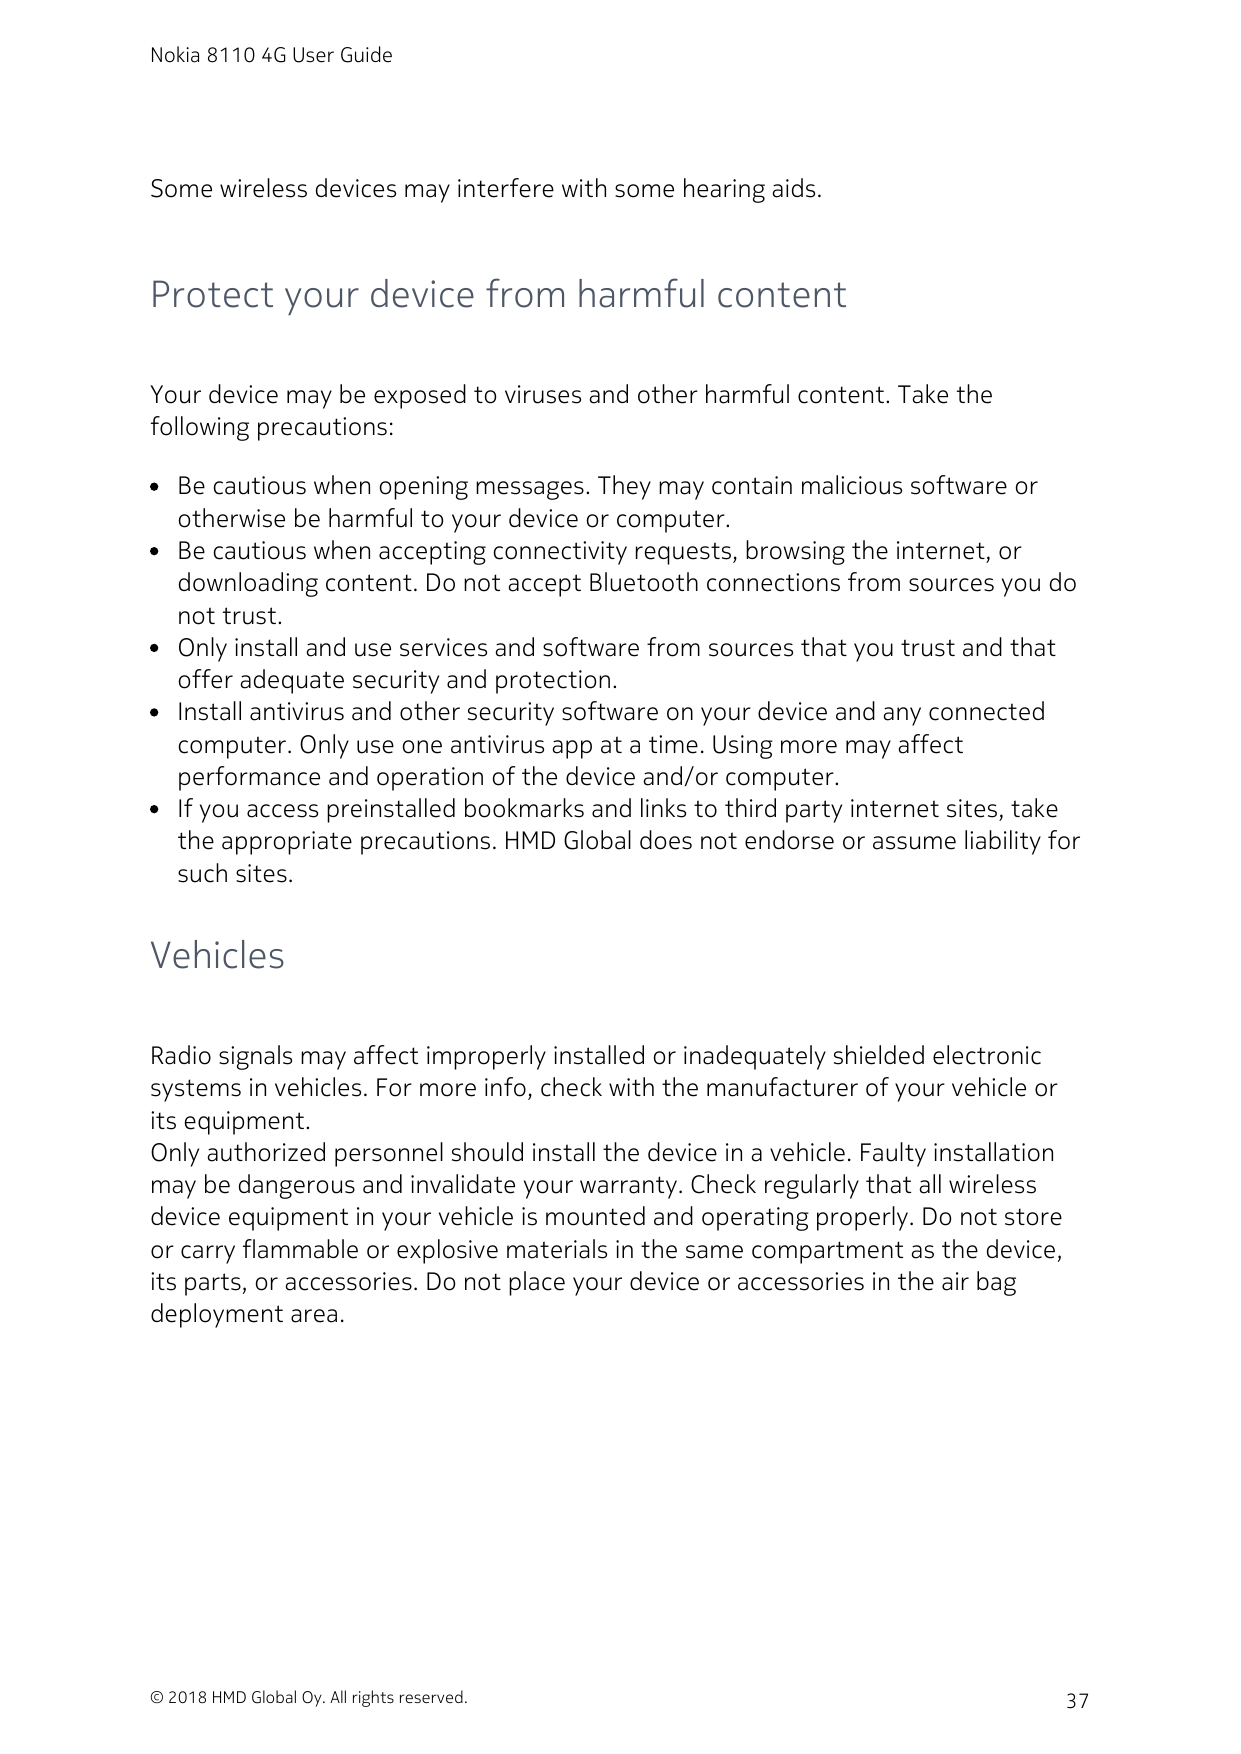 Nokia 8110 4G User GuideSome wireless devices may interfere with some hearing aids.Protect your device from harmful contentYour 